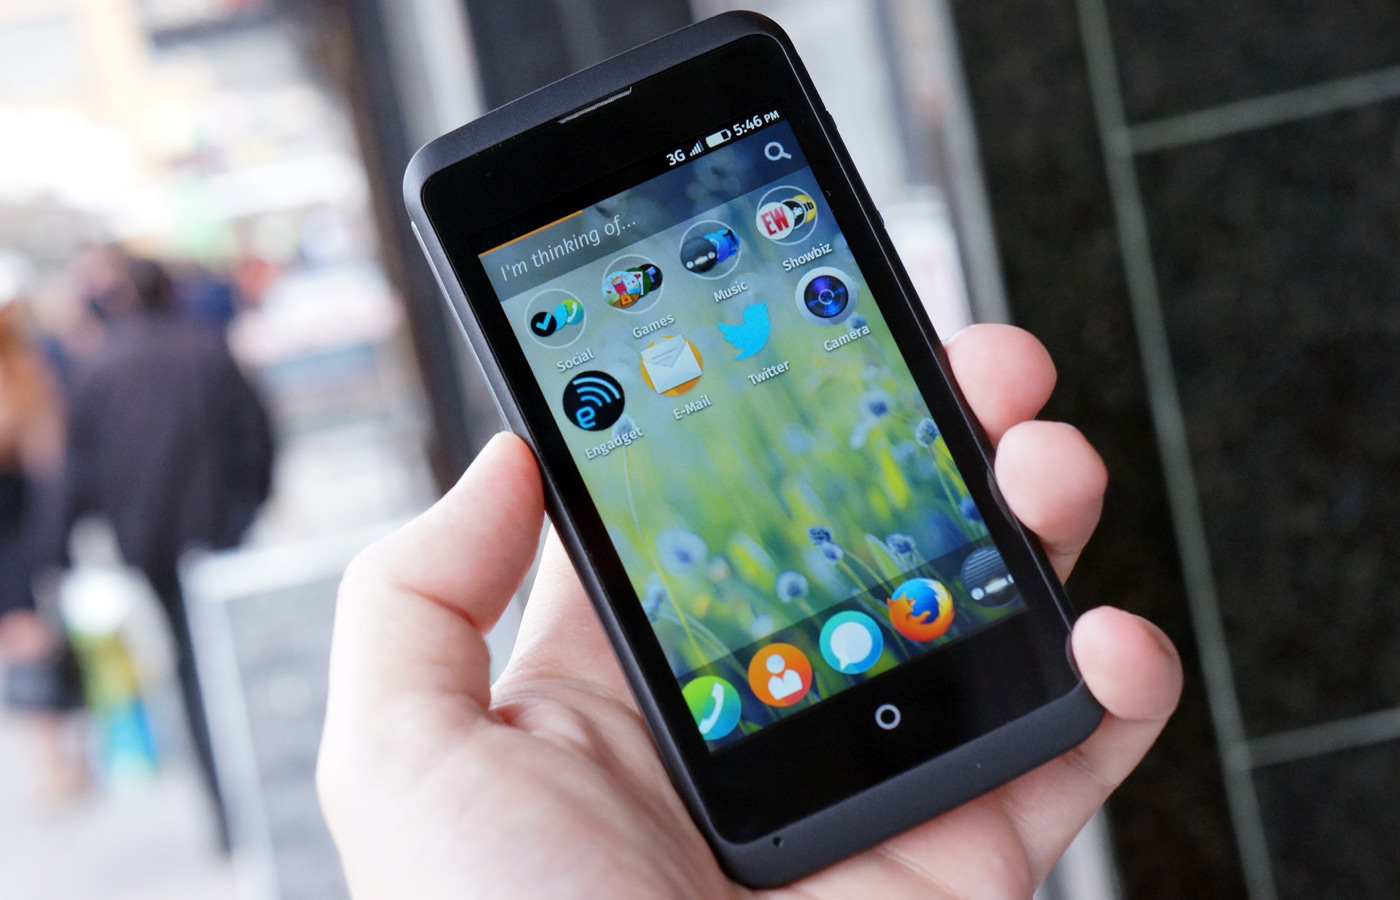 Mozilla stops working on Firefox OS smartphones